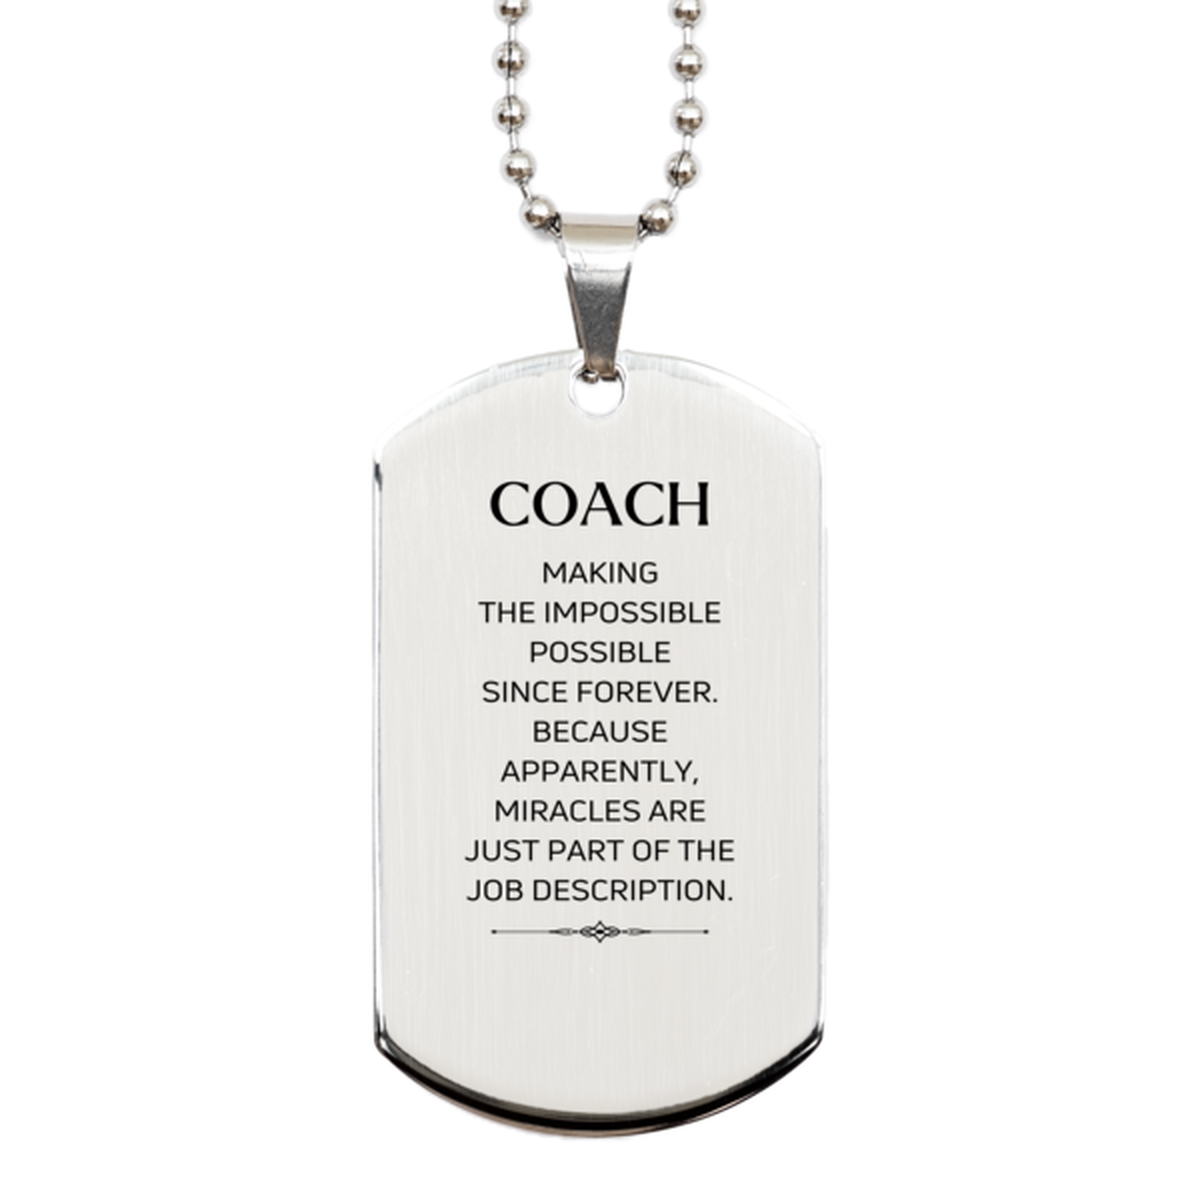 Funny Coach Gifts, Miracles are just part of the job description, Inspirational Birthday Silver Dog Tag For Coach, Men, Women, Coworkers, Friends, Boss